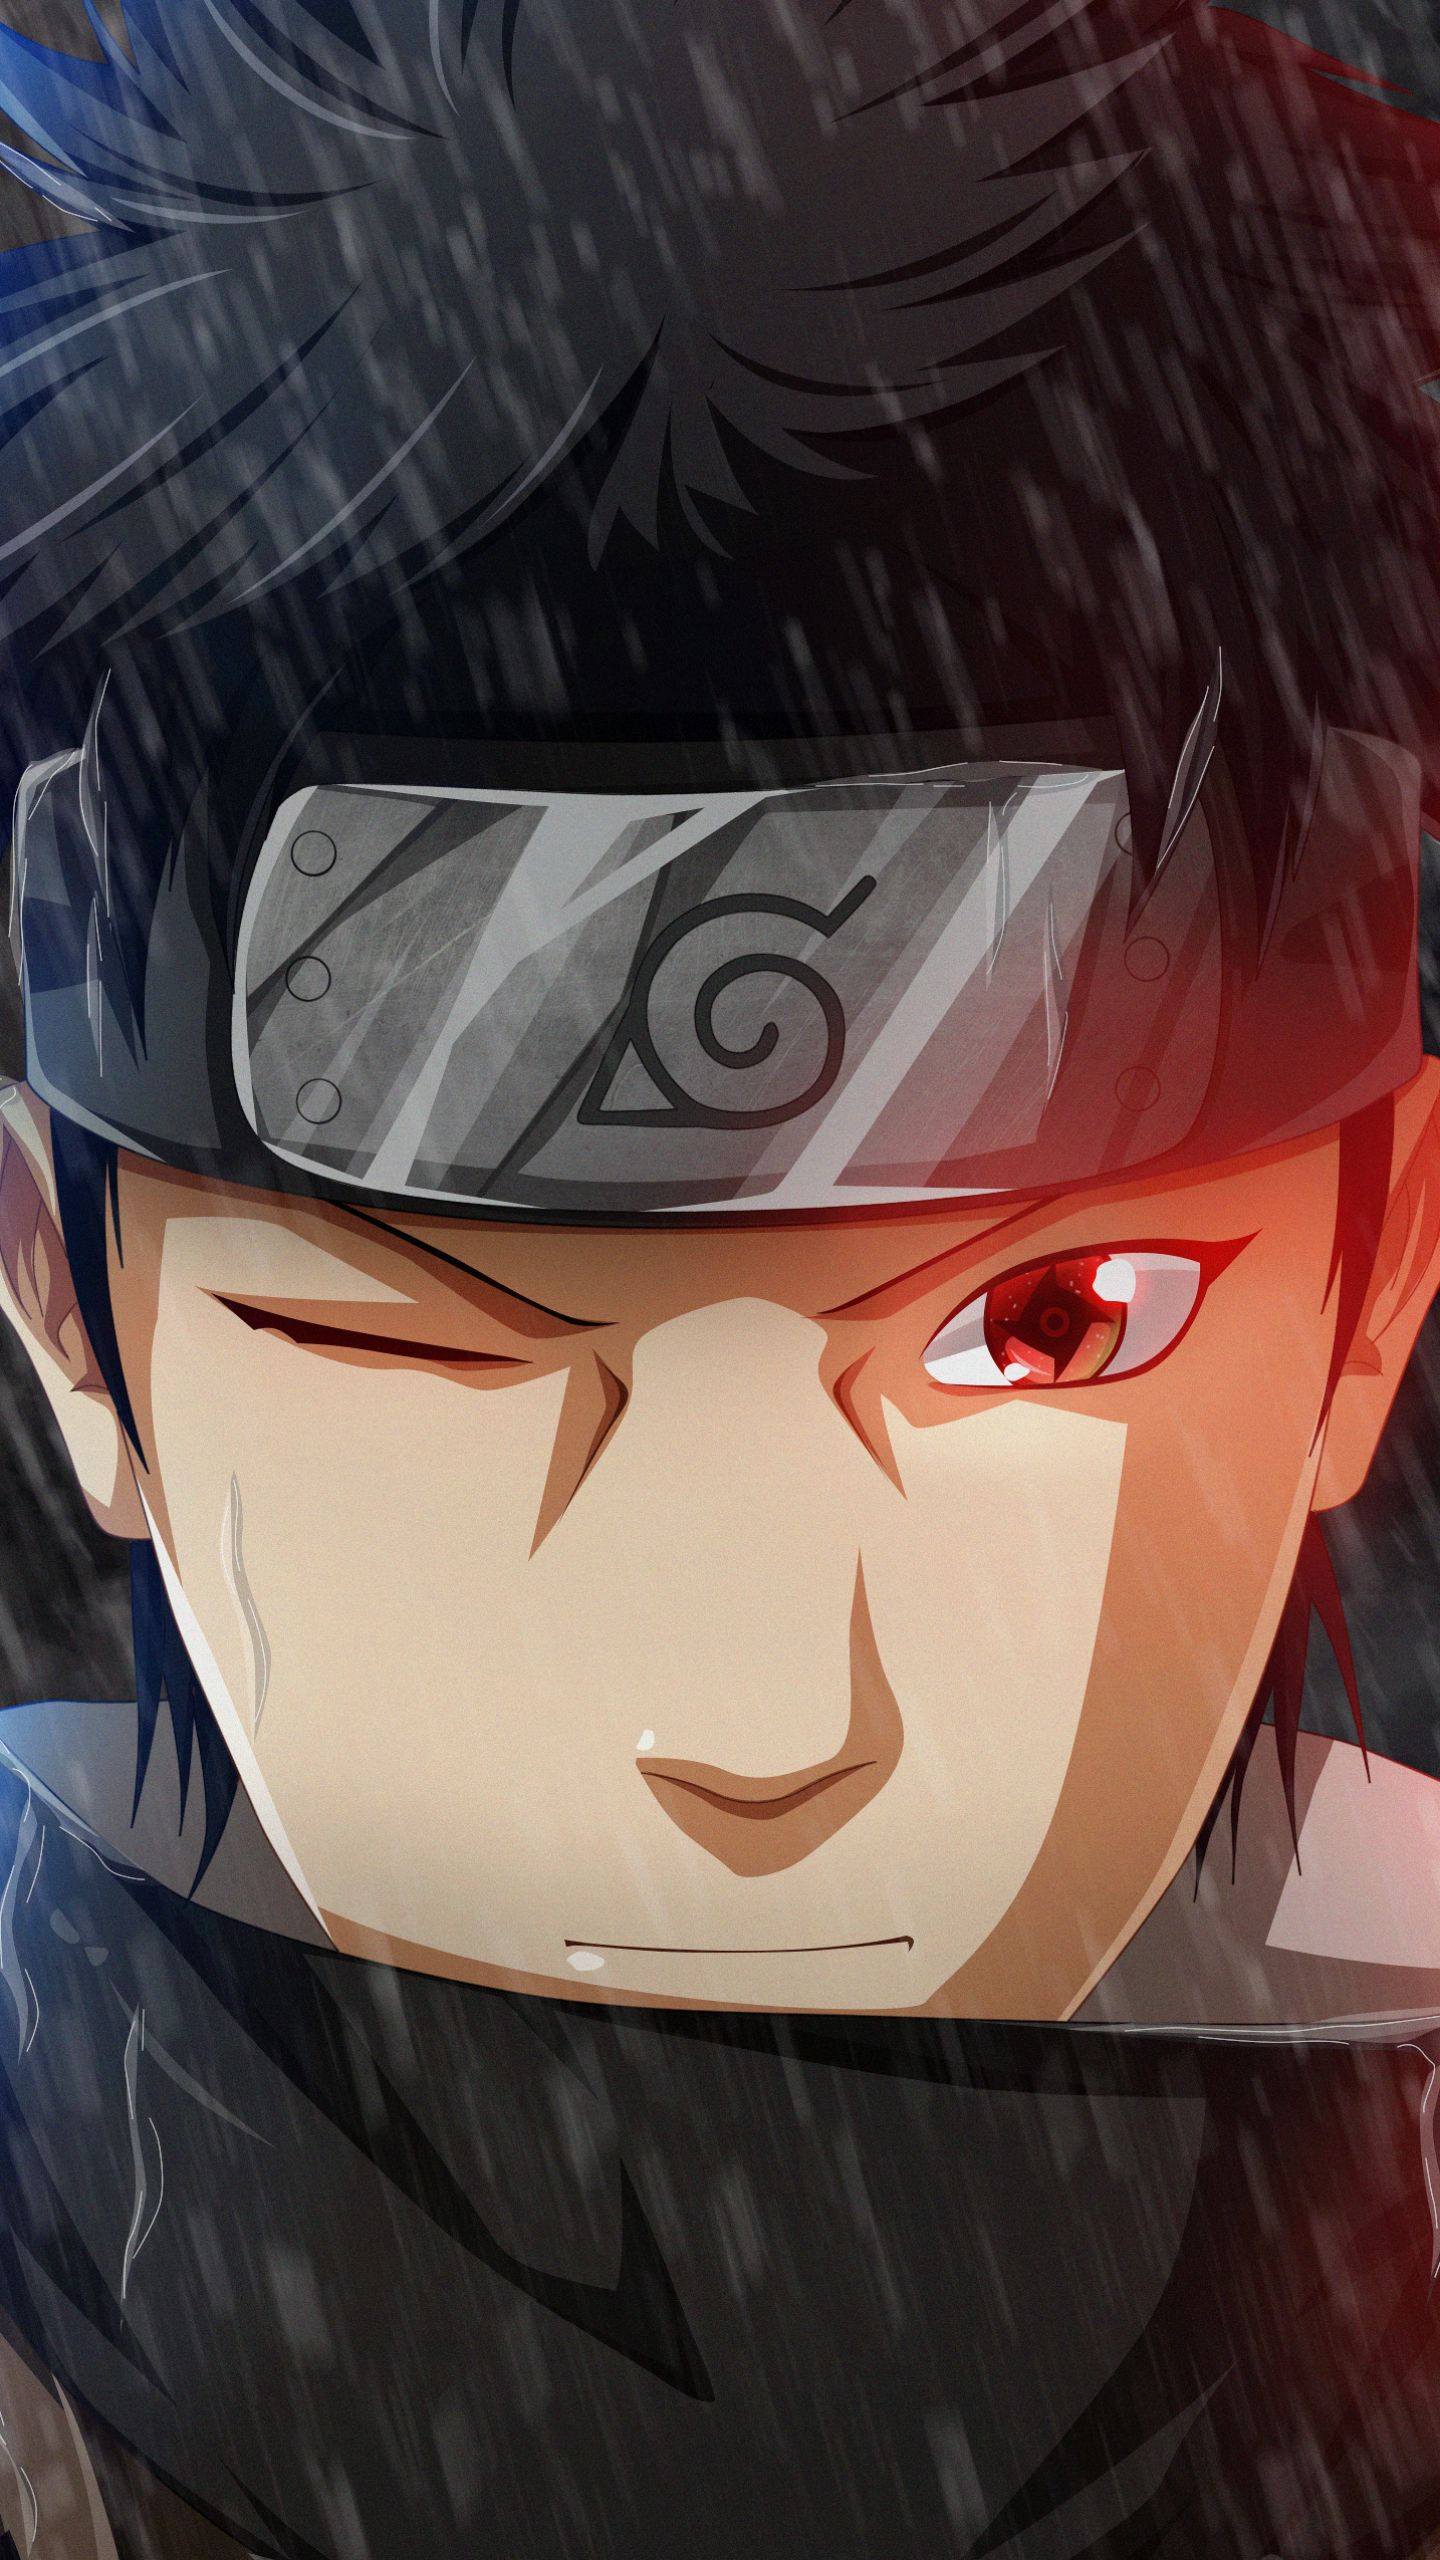 Shisui Uchiha wallpapers for desktop, download free Shisui Uchiha pictures  and backgrounds for PC 